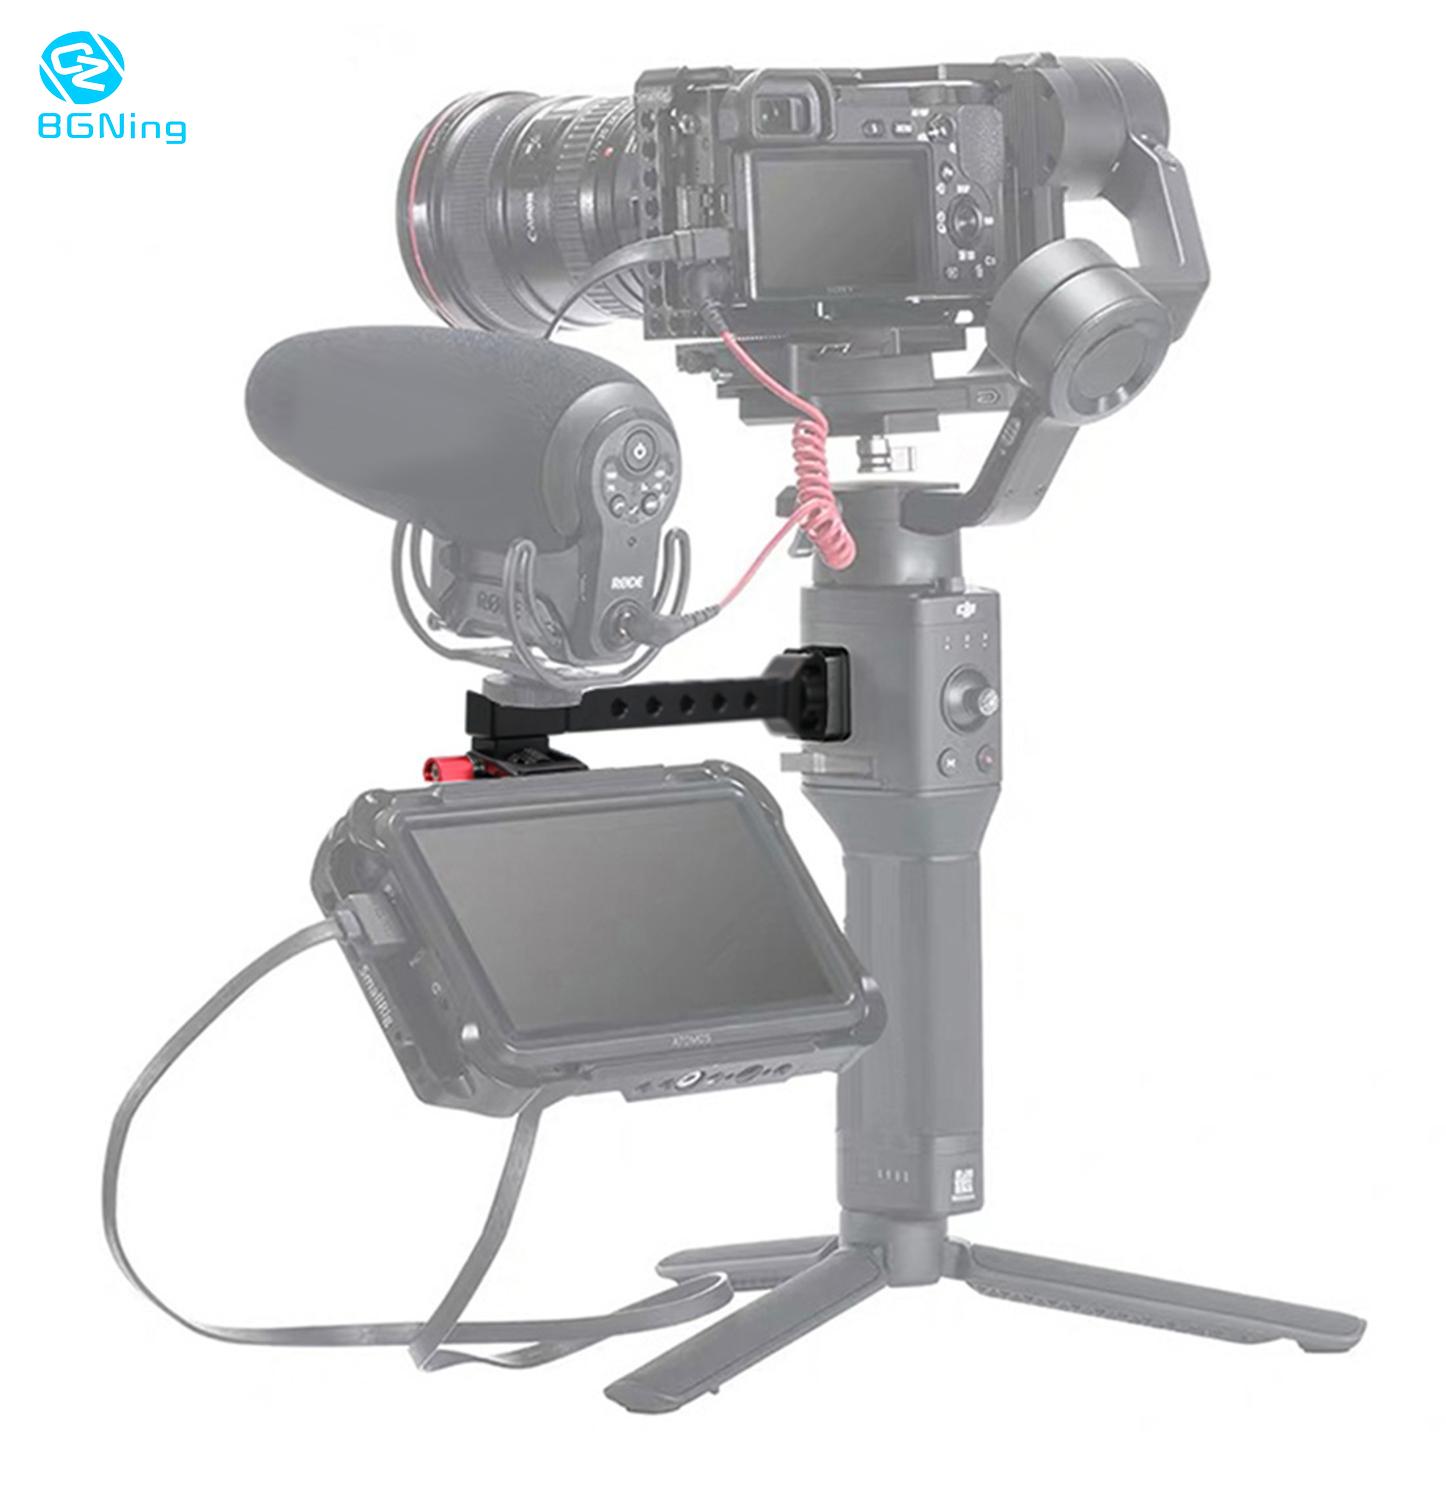 BGNing Stabilizer Monitor Support Mic Bracket Pole with Cold Shoe Mount Adapter for Ronin S SC for Zhiyun Crane 3 Weebill Gimbal